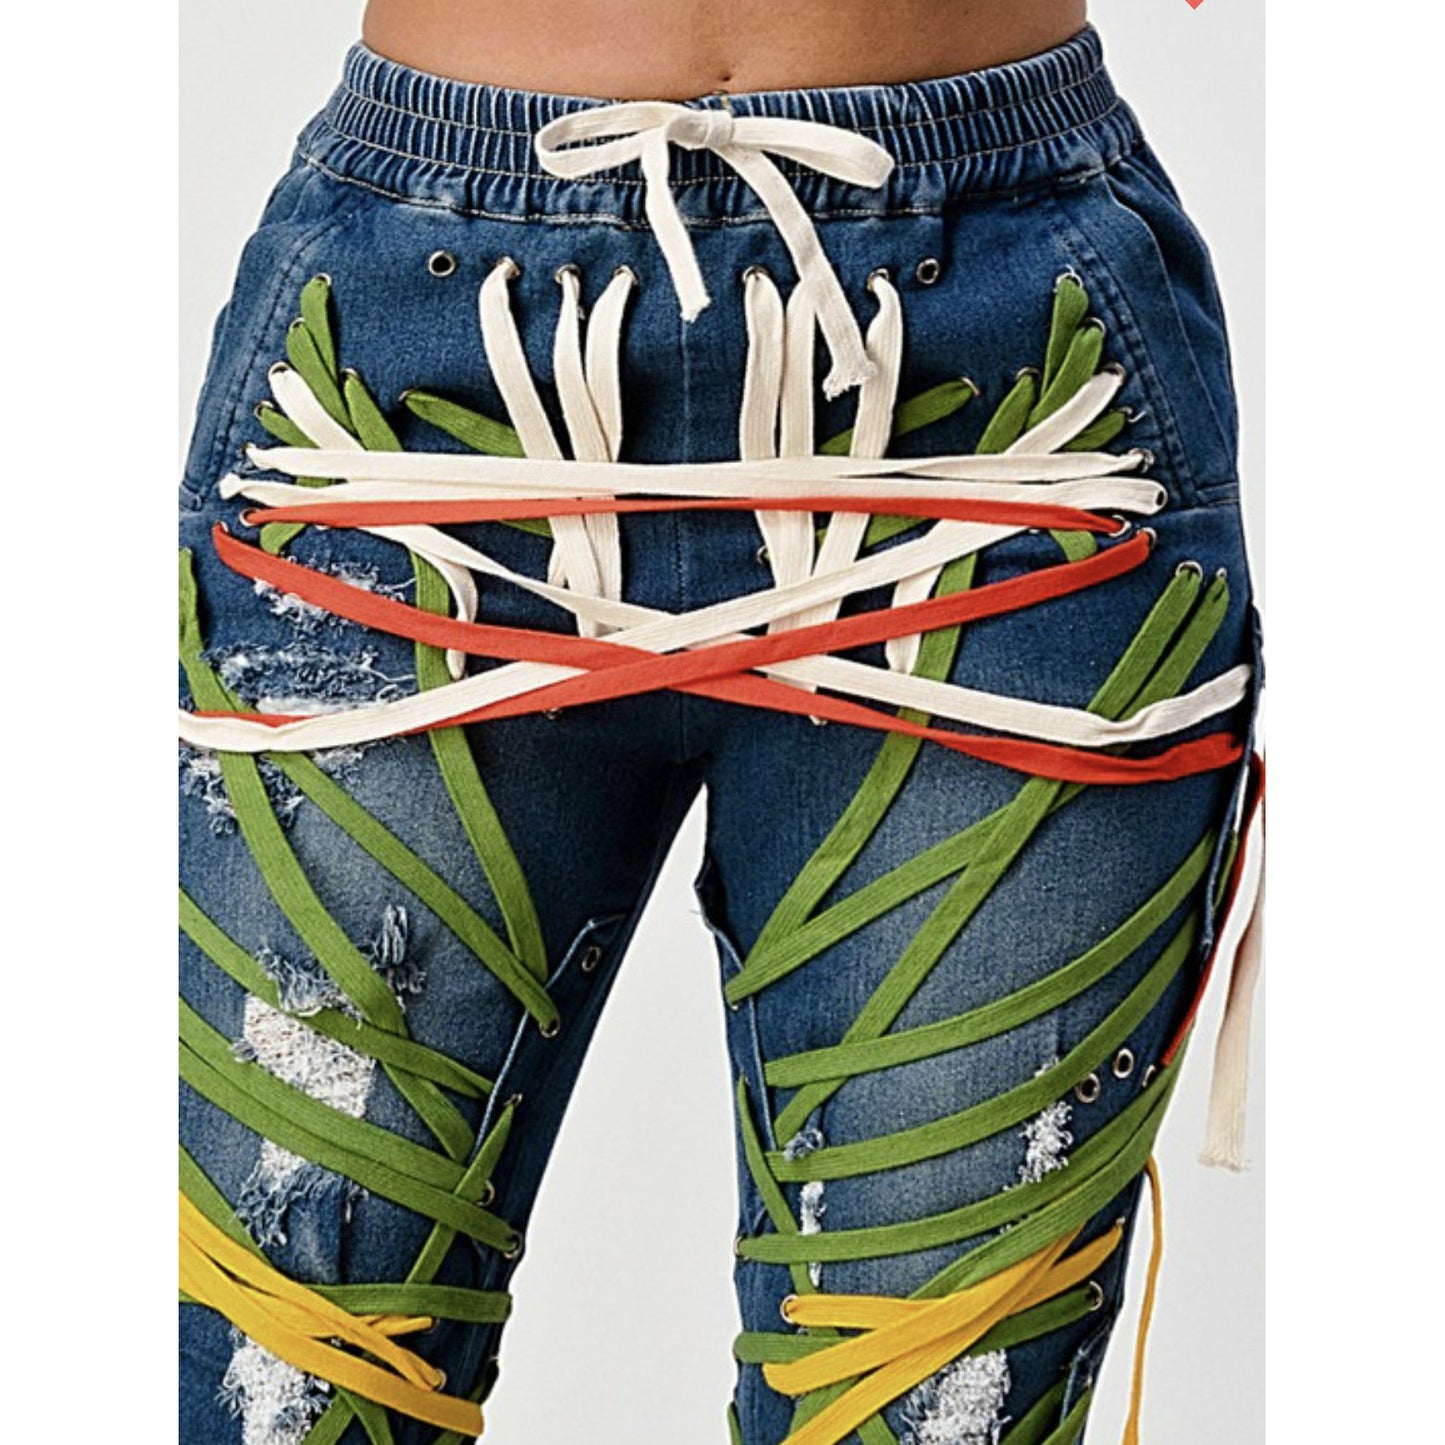 All over lace up multicolored jeans